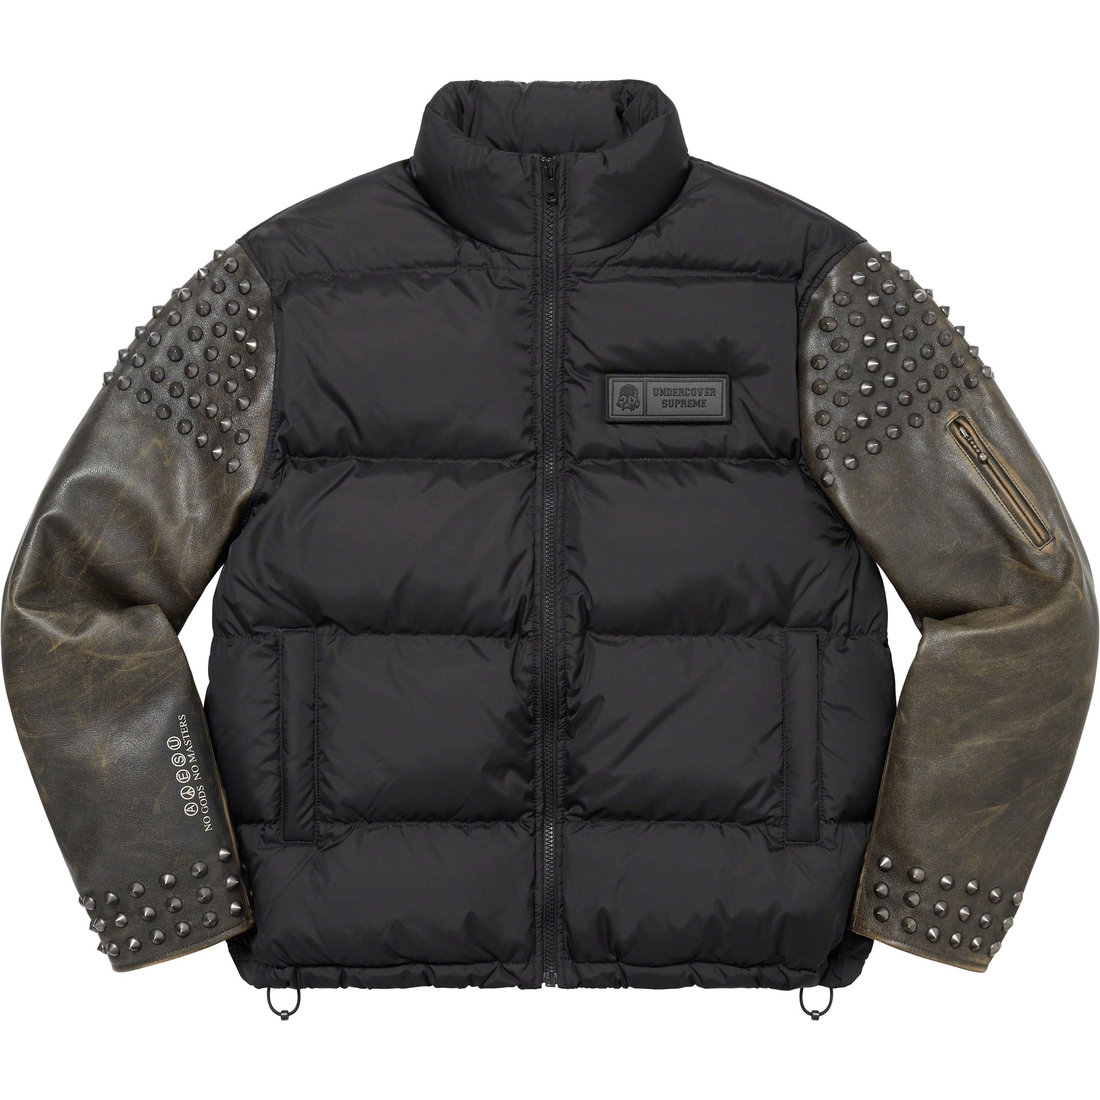 Supreme undercover puffer leather jacket | ochge.org